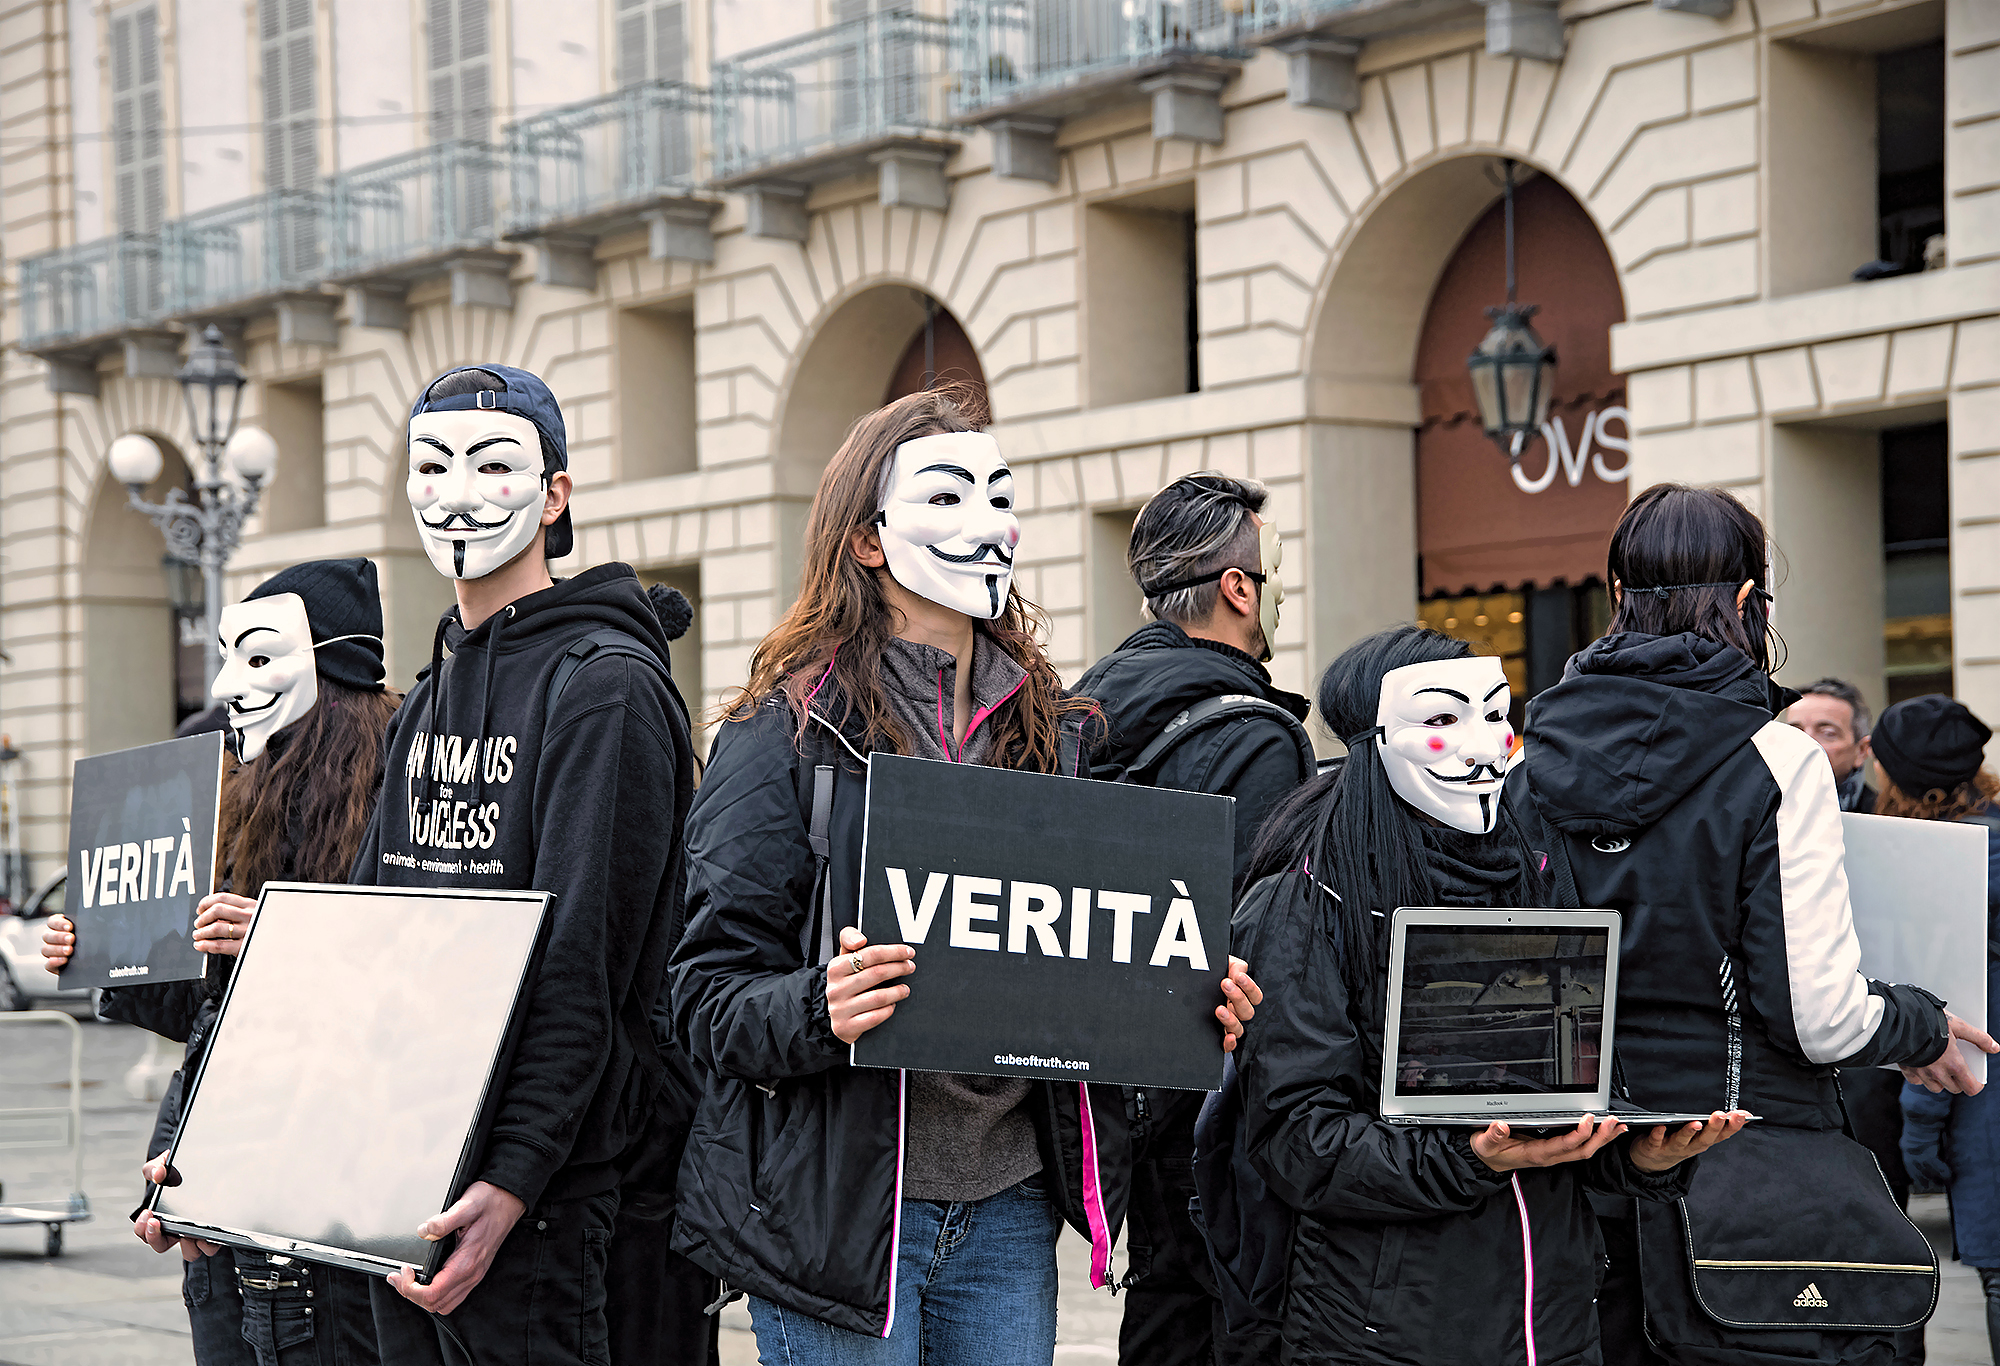 "CuBe Of TrUtH" a Torino...